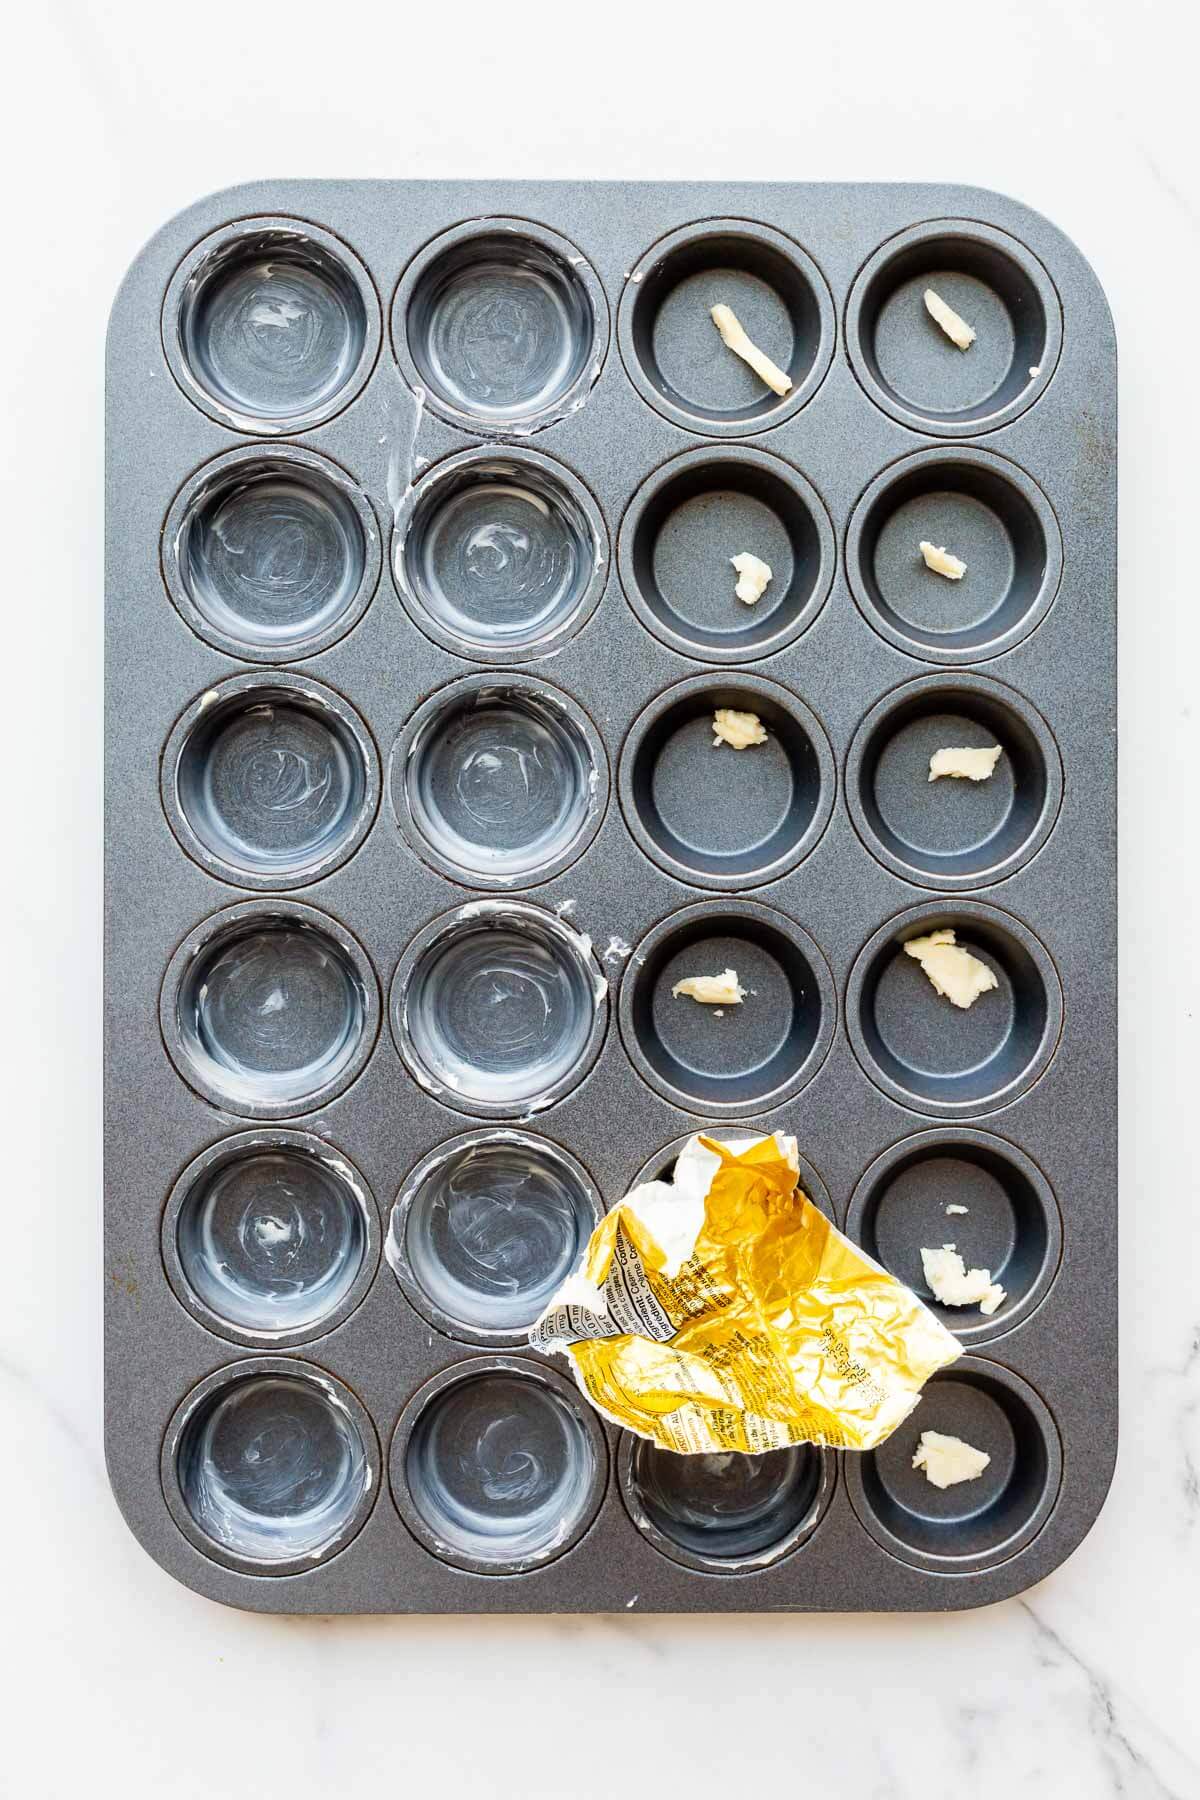 Buttering the wells of a mini muffin pan with softened butter and a butter wrapper.